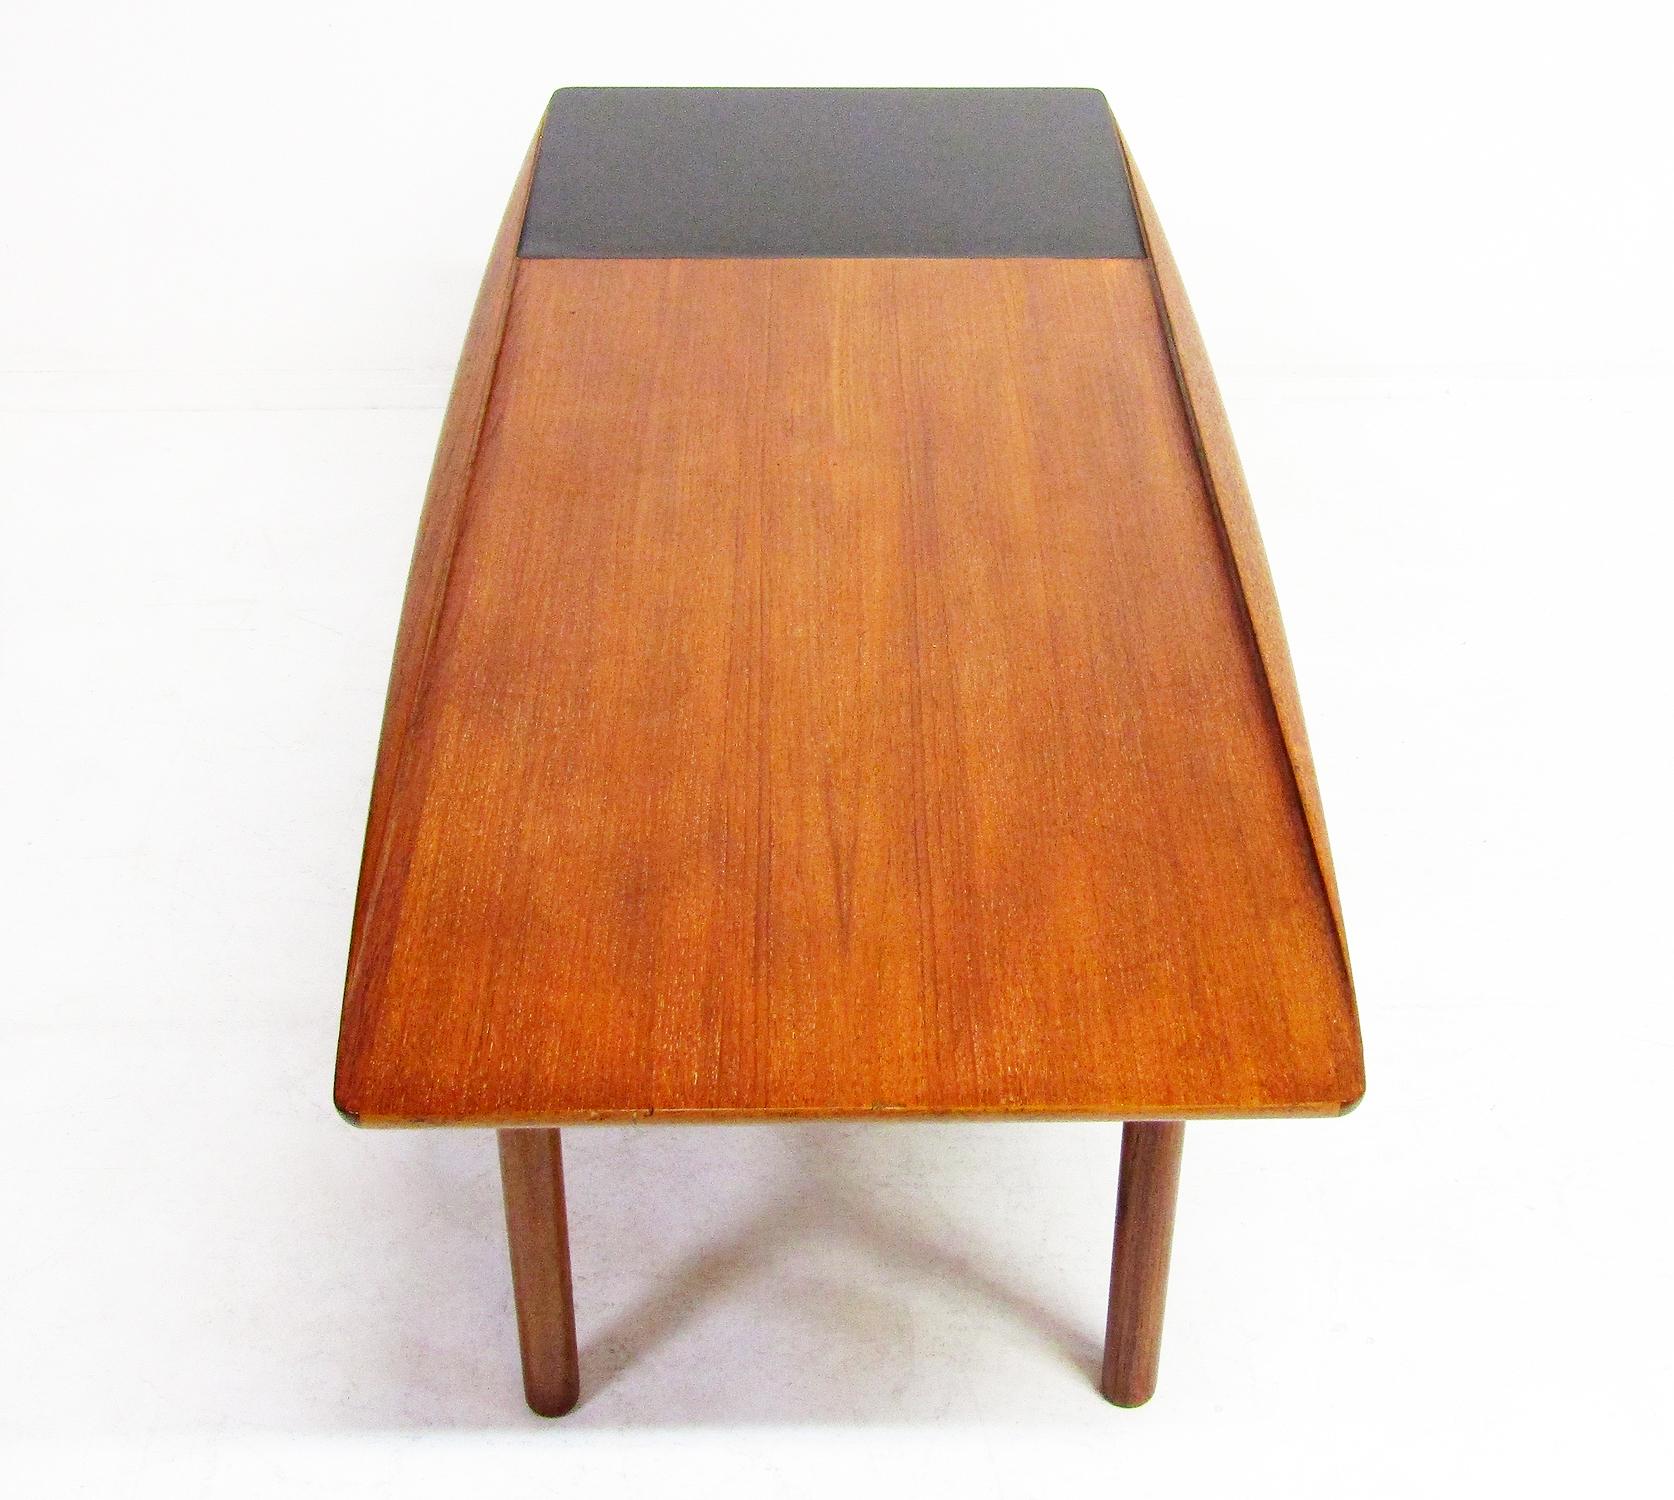 A Danish 1950s surfboard coffee table by Grete Jalk for Poul Jeppesen.

It has beautiful sculpted contours. The teak is a rich shade of reddish gold. There is a black formica area for drinks

The Poul Jeppesen label is affixed to the